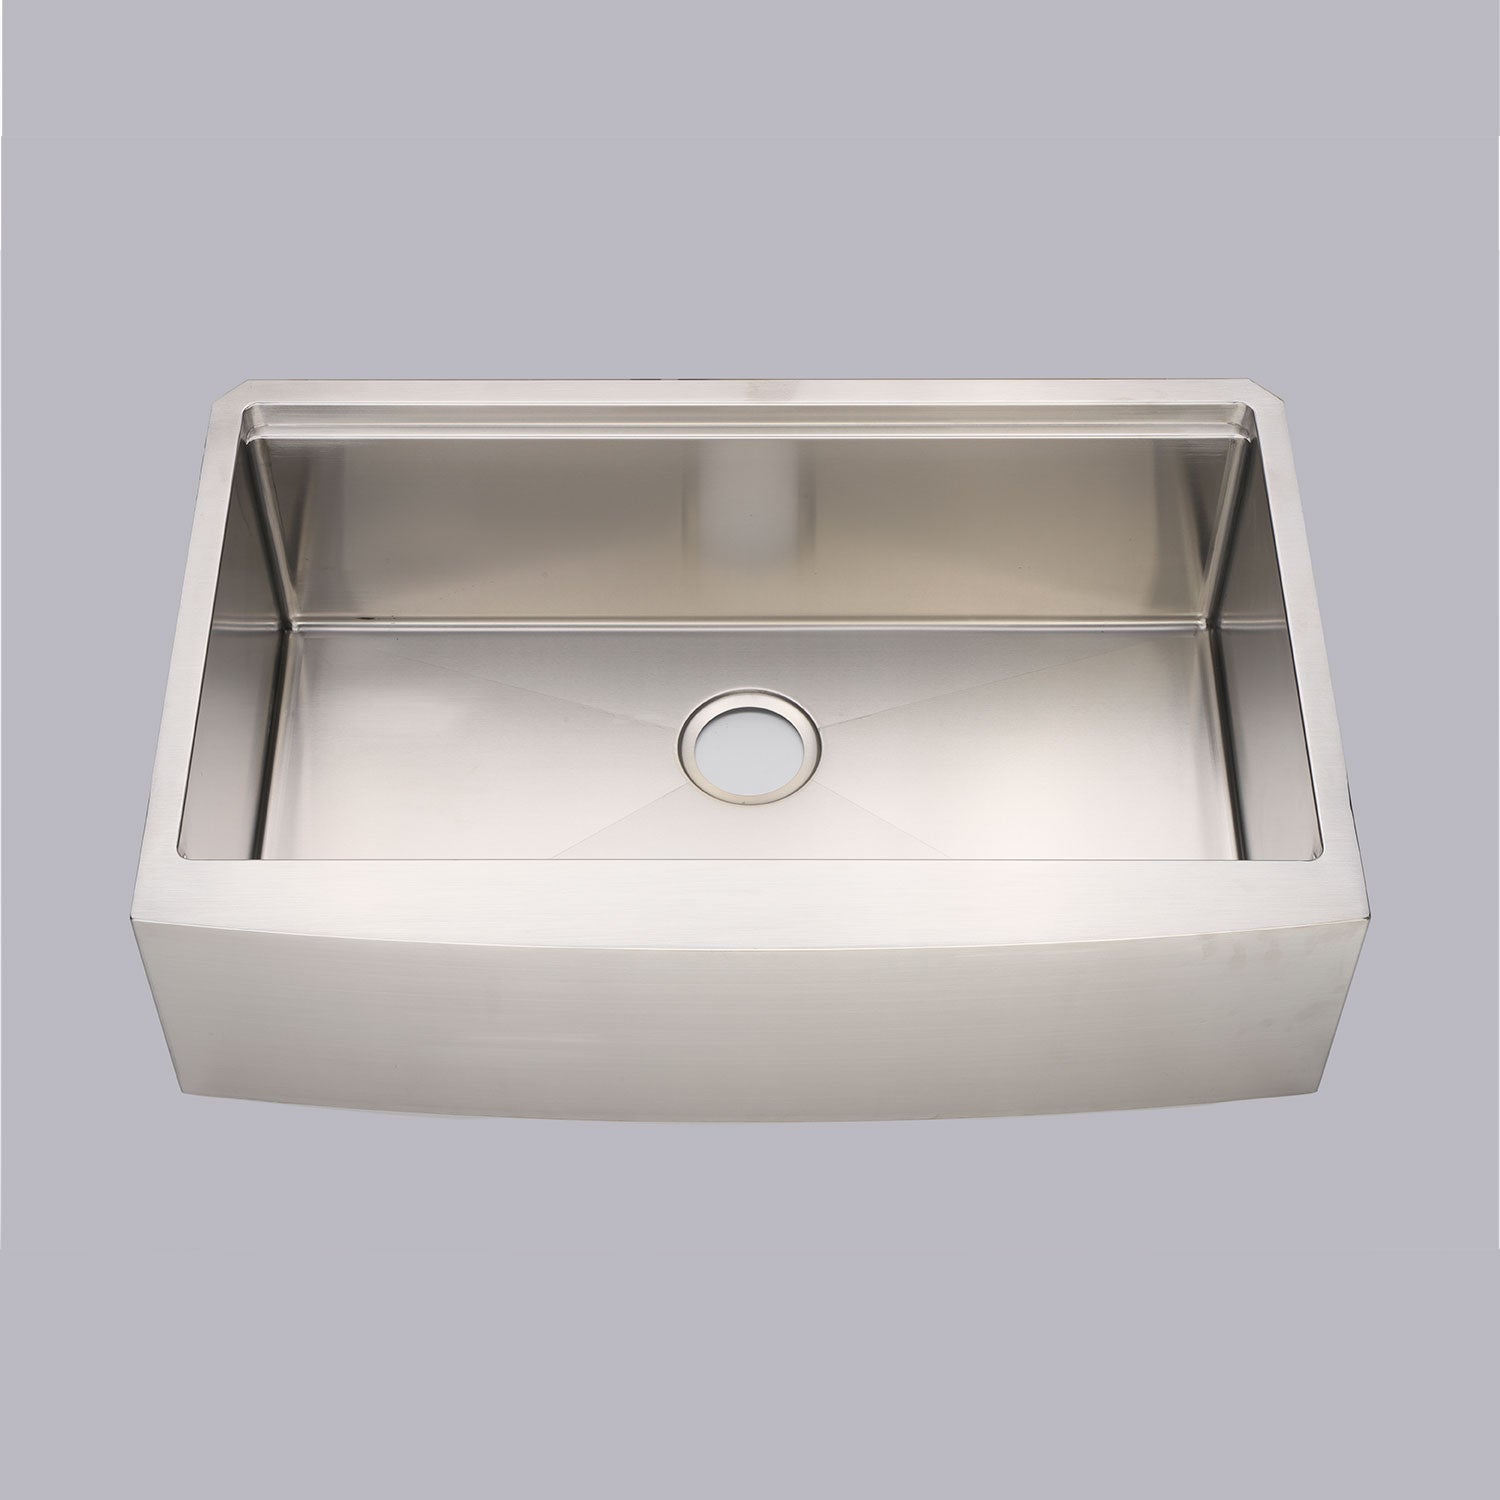 DAX Farmhouse Single Bowl Top Mount Kitchen Sink 33 x 21 - R10 - 18G. Accessories Included